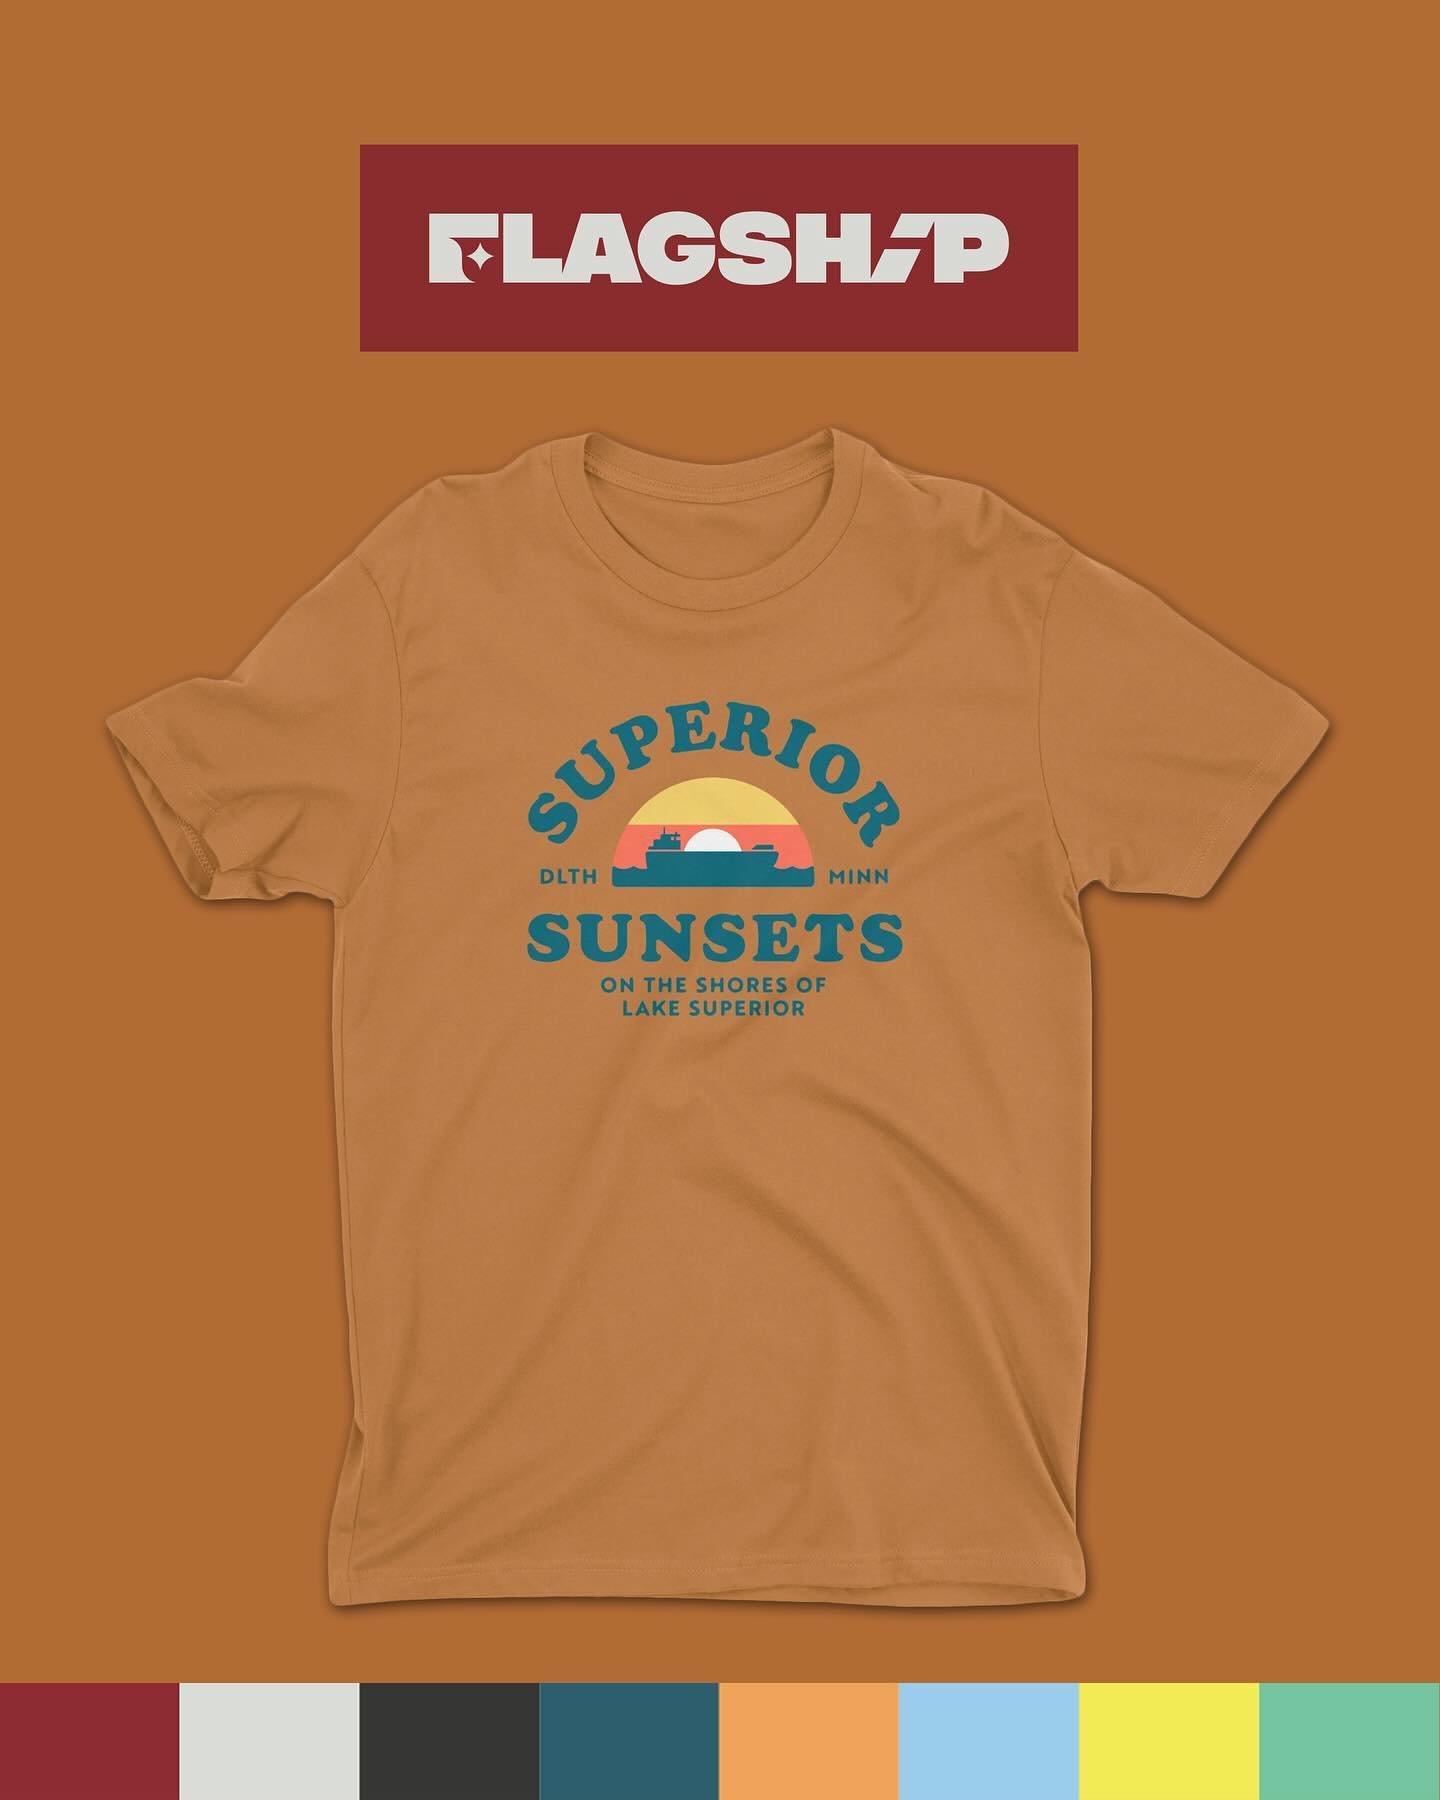 🌅 SUPERIOR SUNSETS 🚢
&bull;
Another NEW DESIGN from our company pal, Sean. After you&rsquo;ve seen a Superior sunset, normal sunsets are just a little&hellip; meh. 😉 Limited batch of these available now in-store and online! 🧡🚩
&bull;
&bull;
&bul